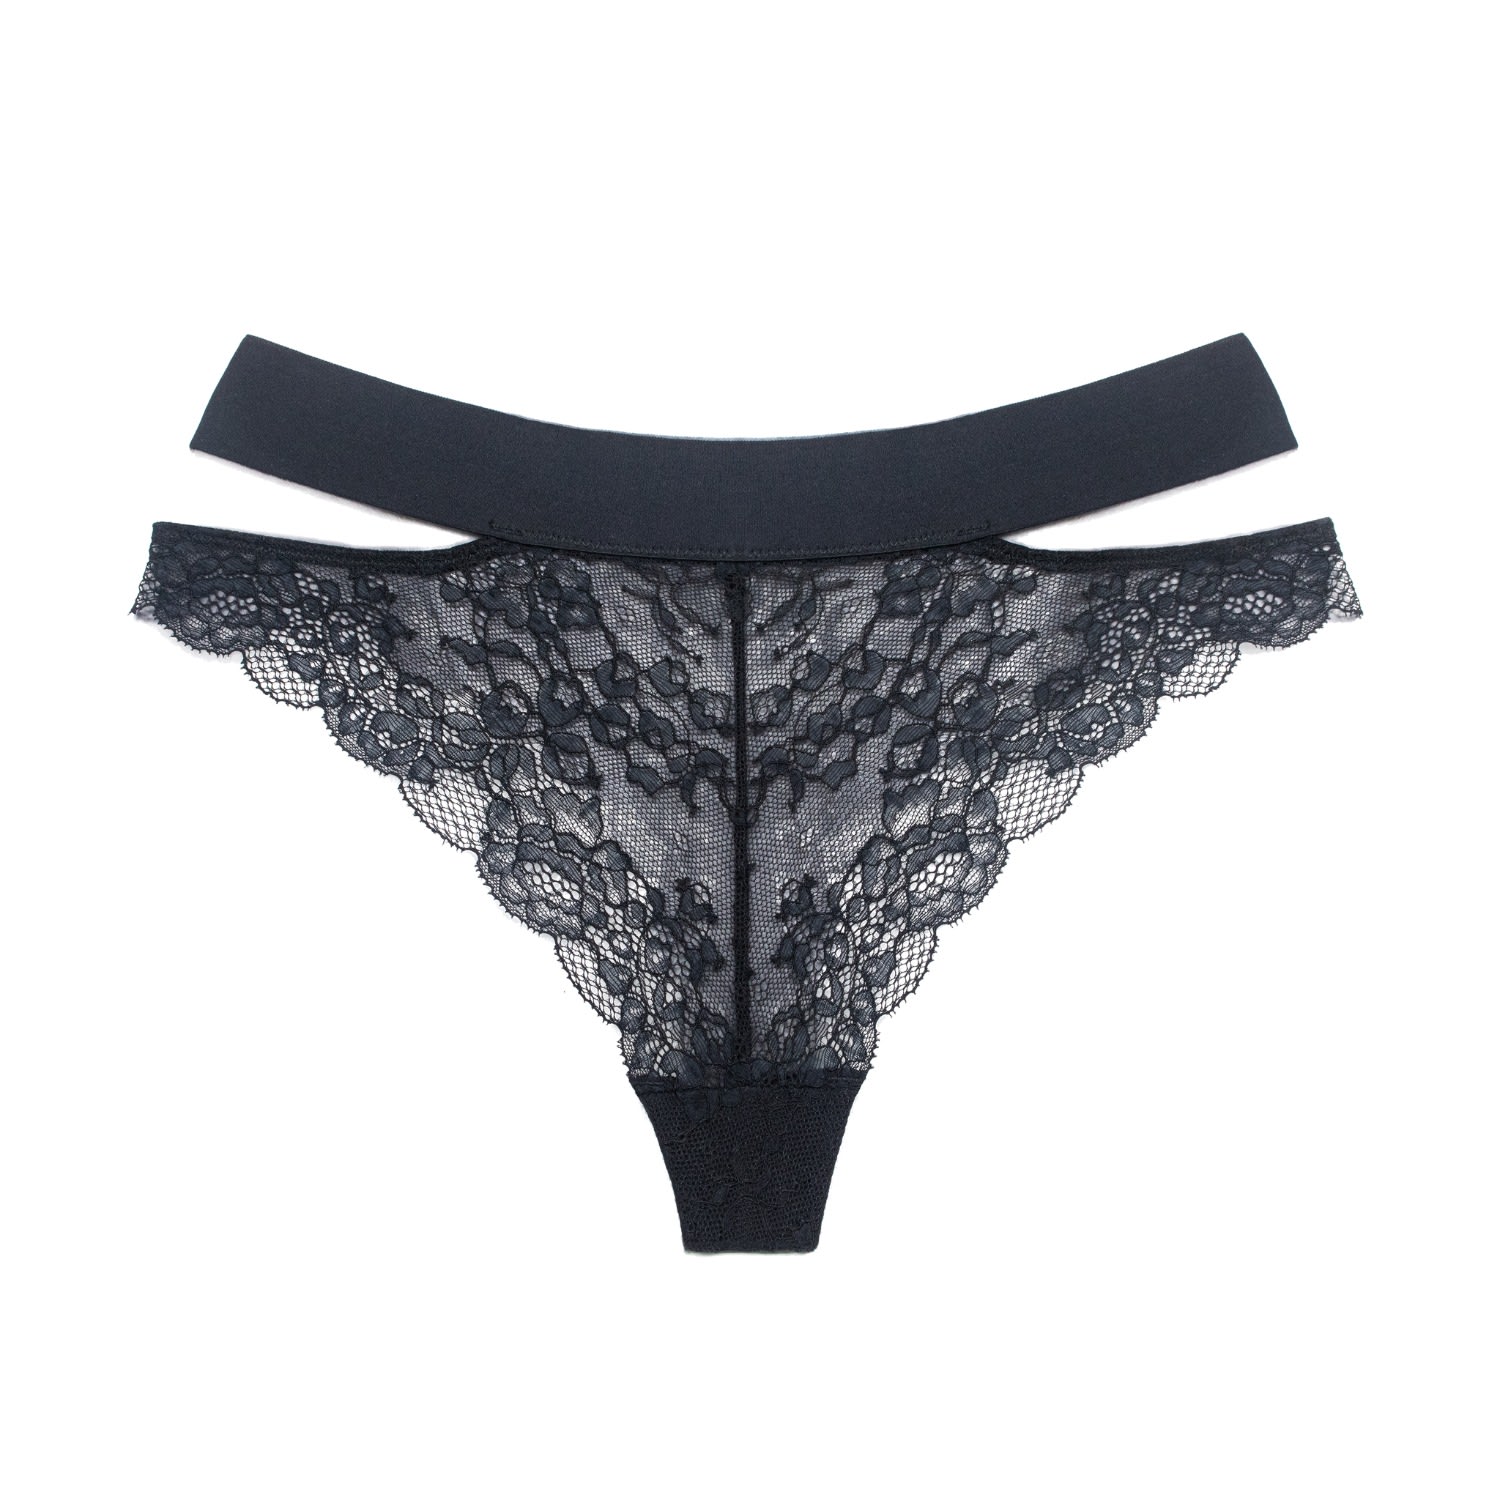 Women’s Wild Lace Cheeky Panty Black Extra Small Monique Morin Lingerie